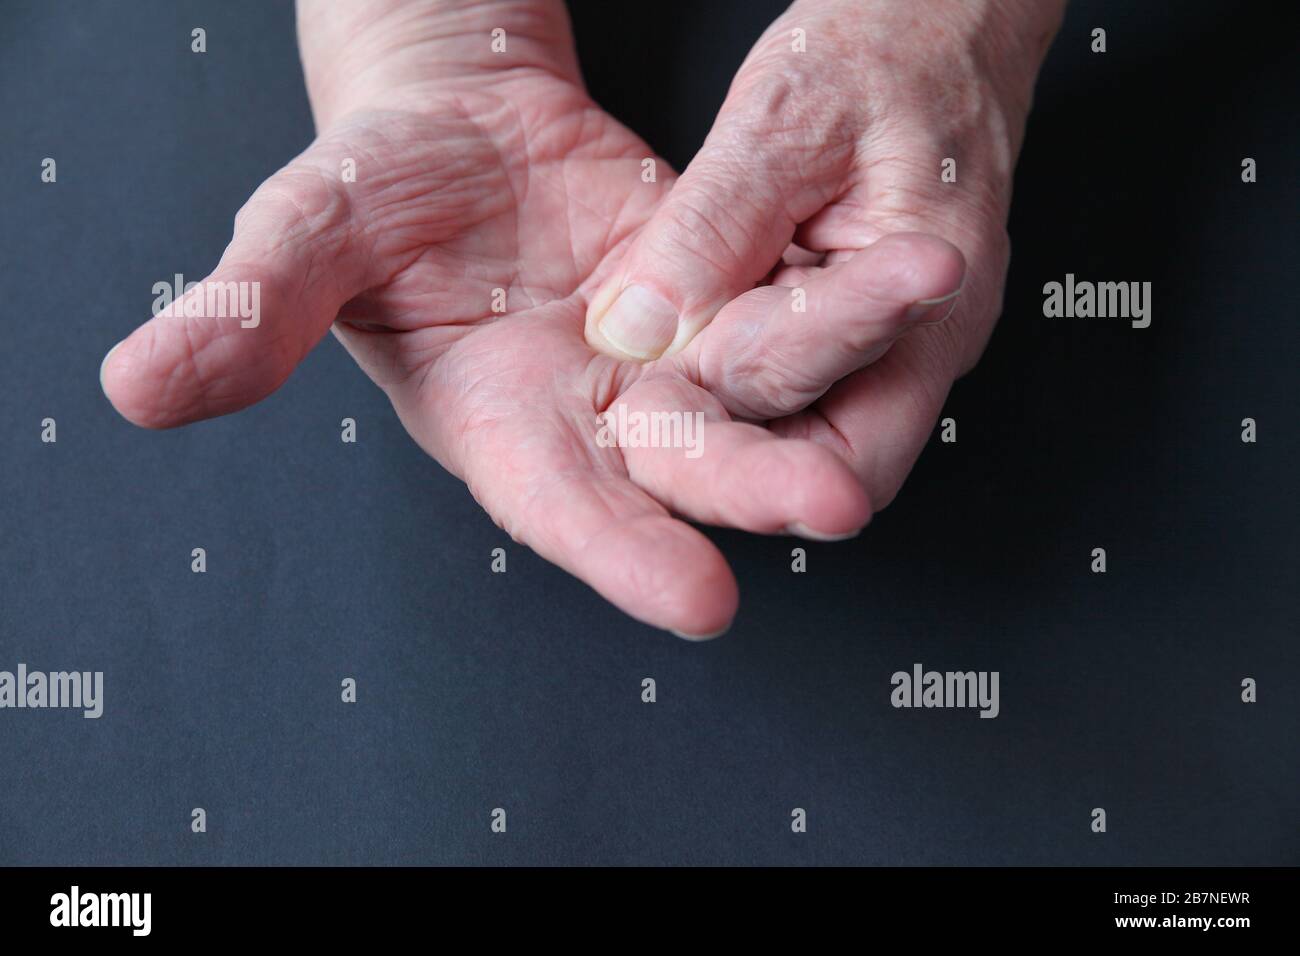 Senior man puts pressure on a sore area of his hand Stock Photo